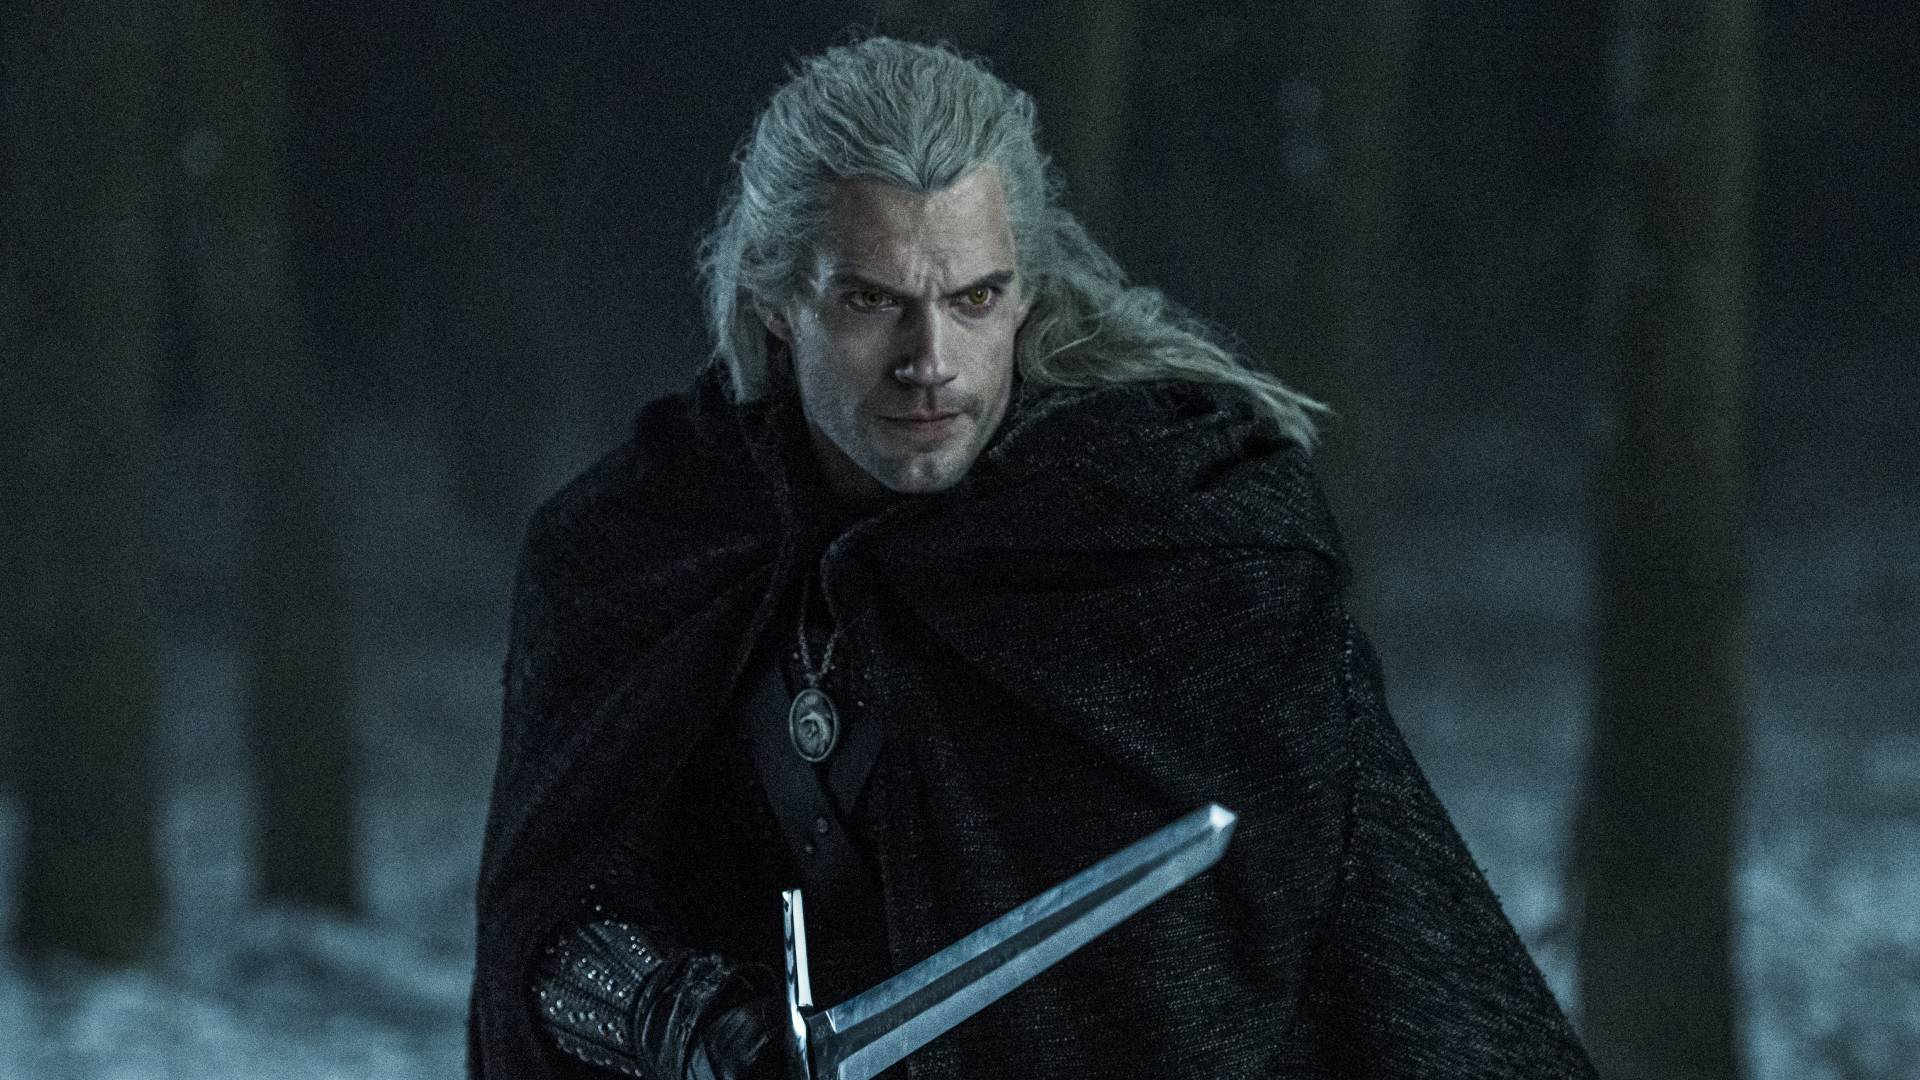 Henry Cavill on The Witcher and Whether He'll Play Superman Again